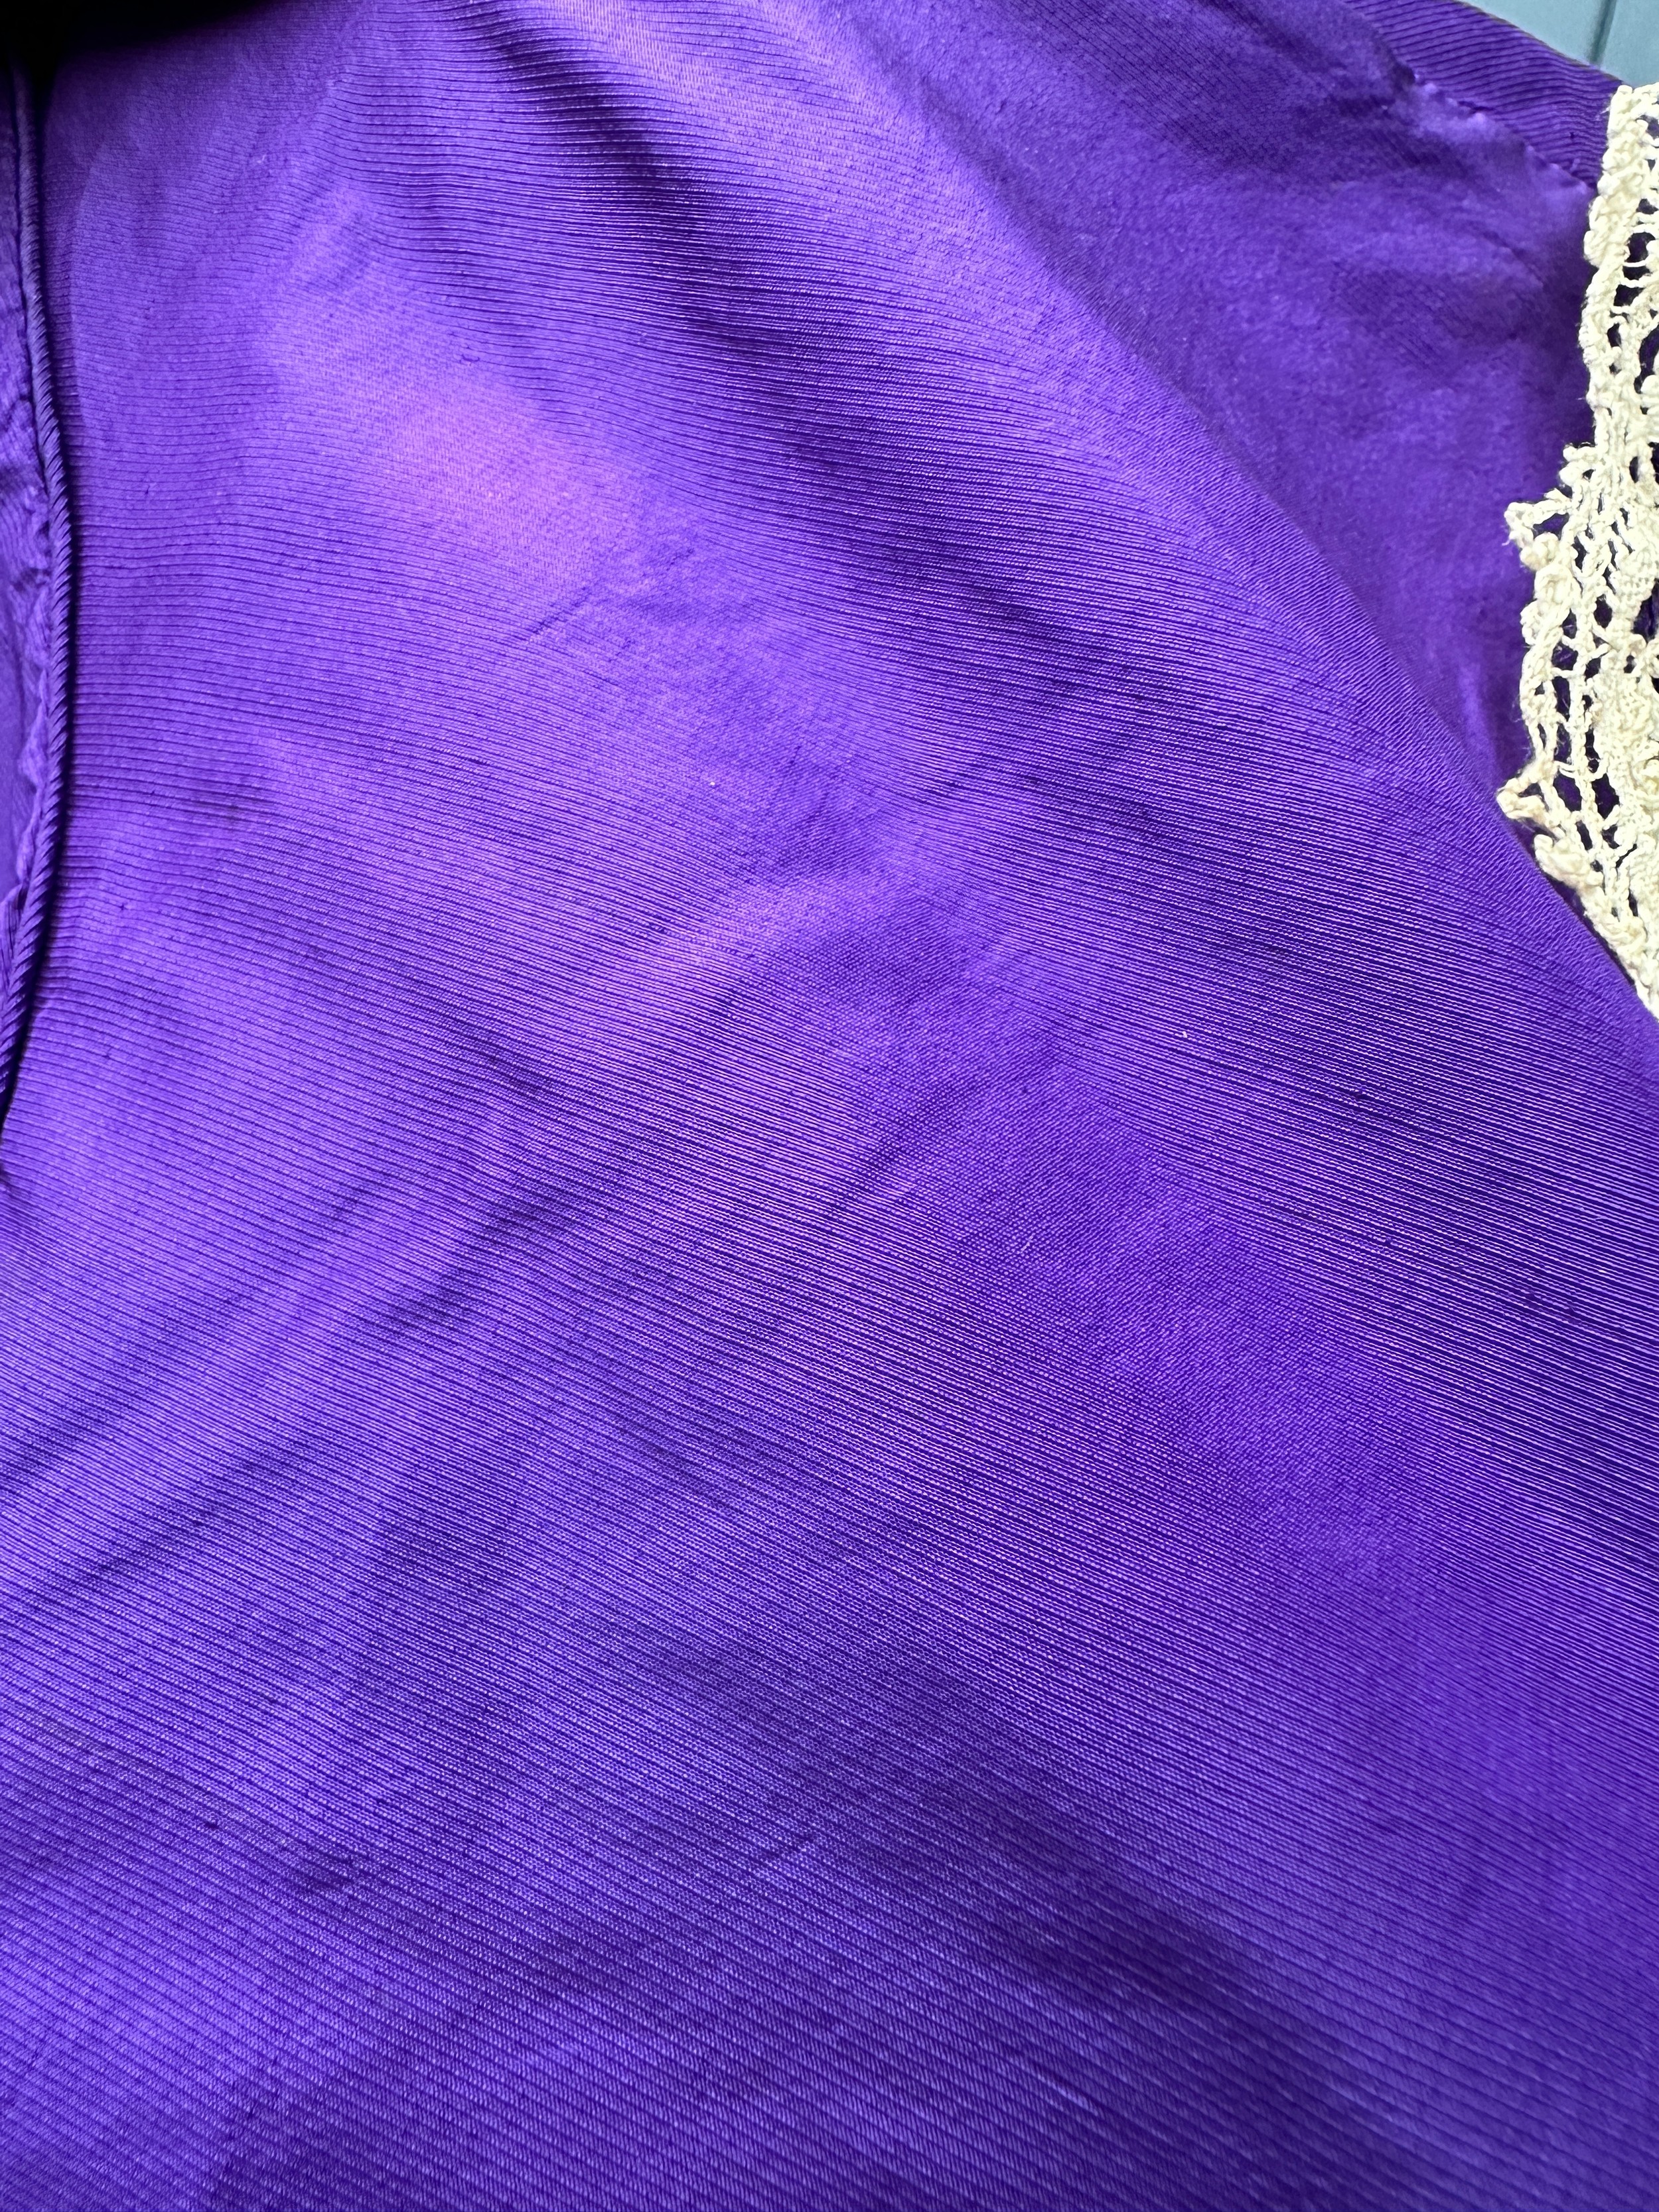 A Victorian taffeta purple skirt and bodice with hooks and bows to the front and lace collar. - Image 7 of 15